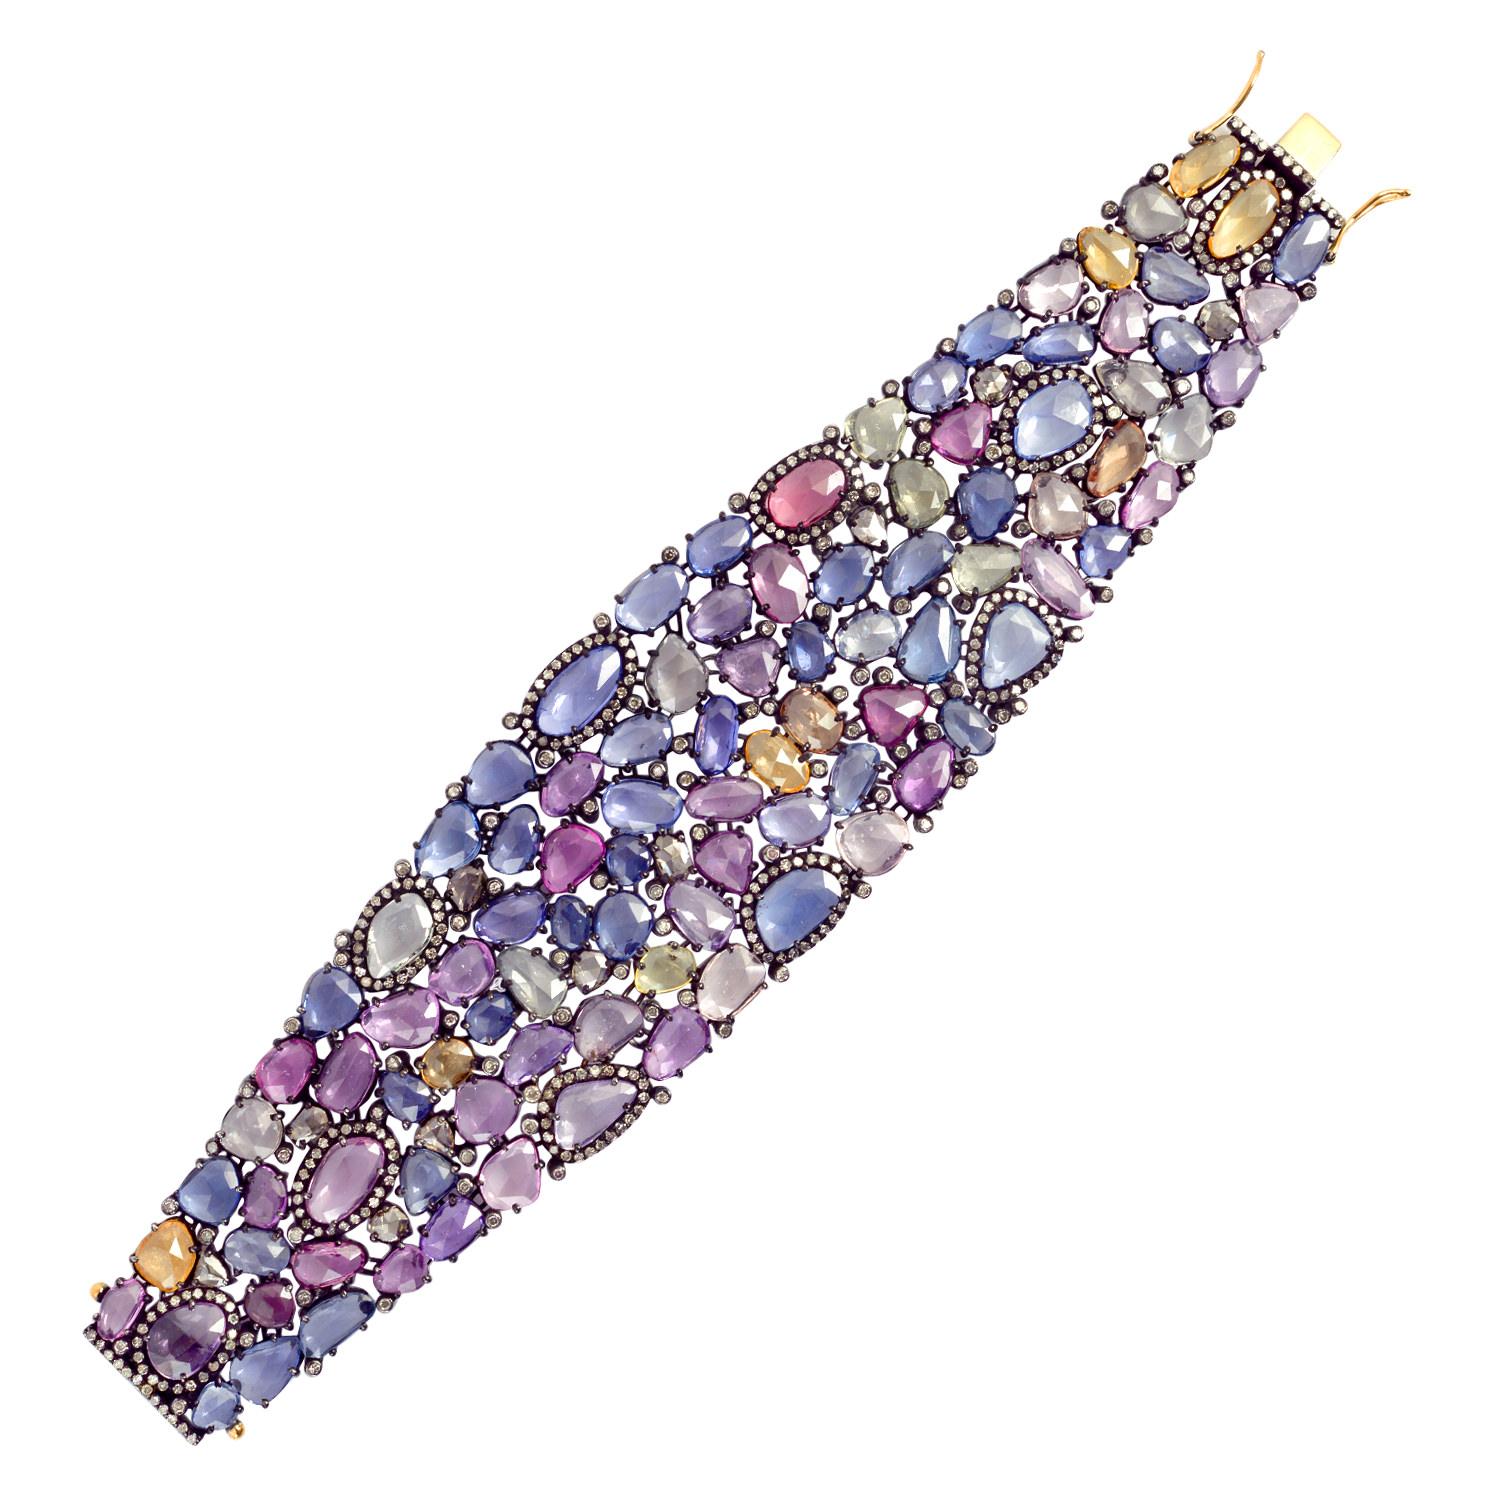 Contemporary 93.94 ct Multi Sapphire Bracelet With Diamonds Made In 18k White Gold & Silver For Sale